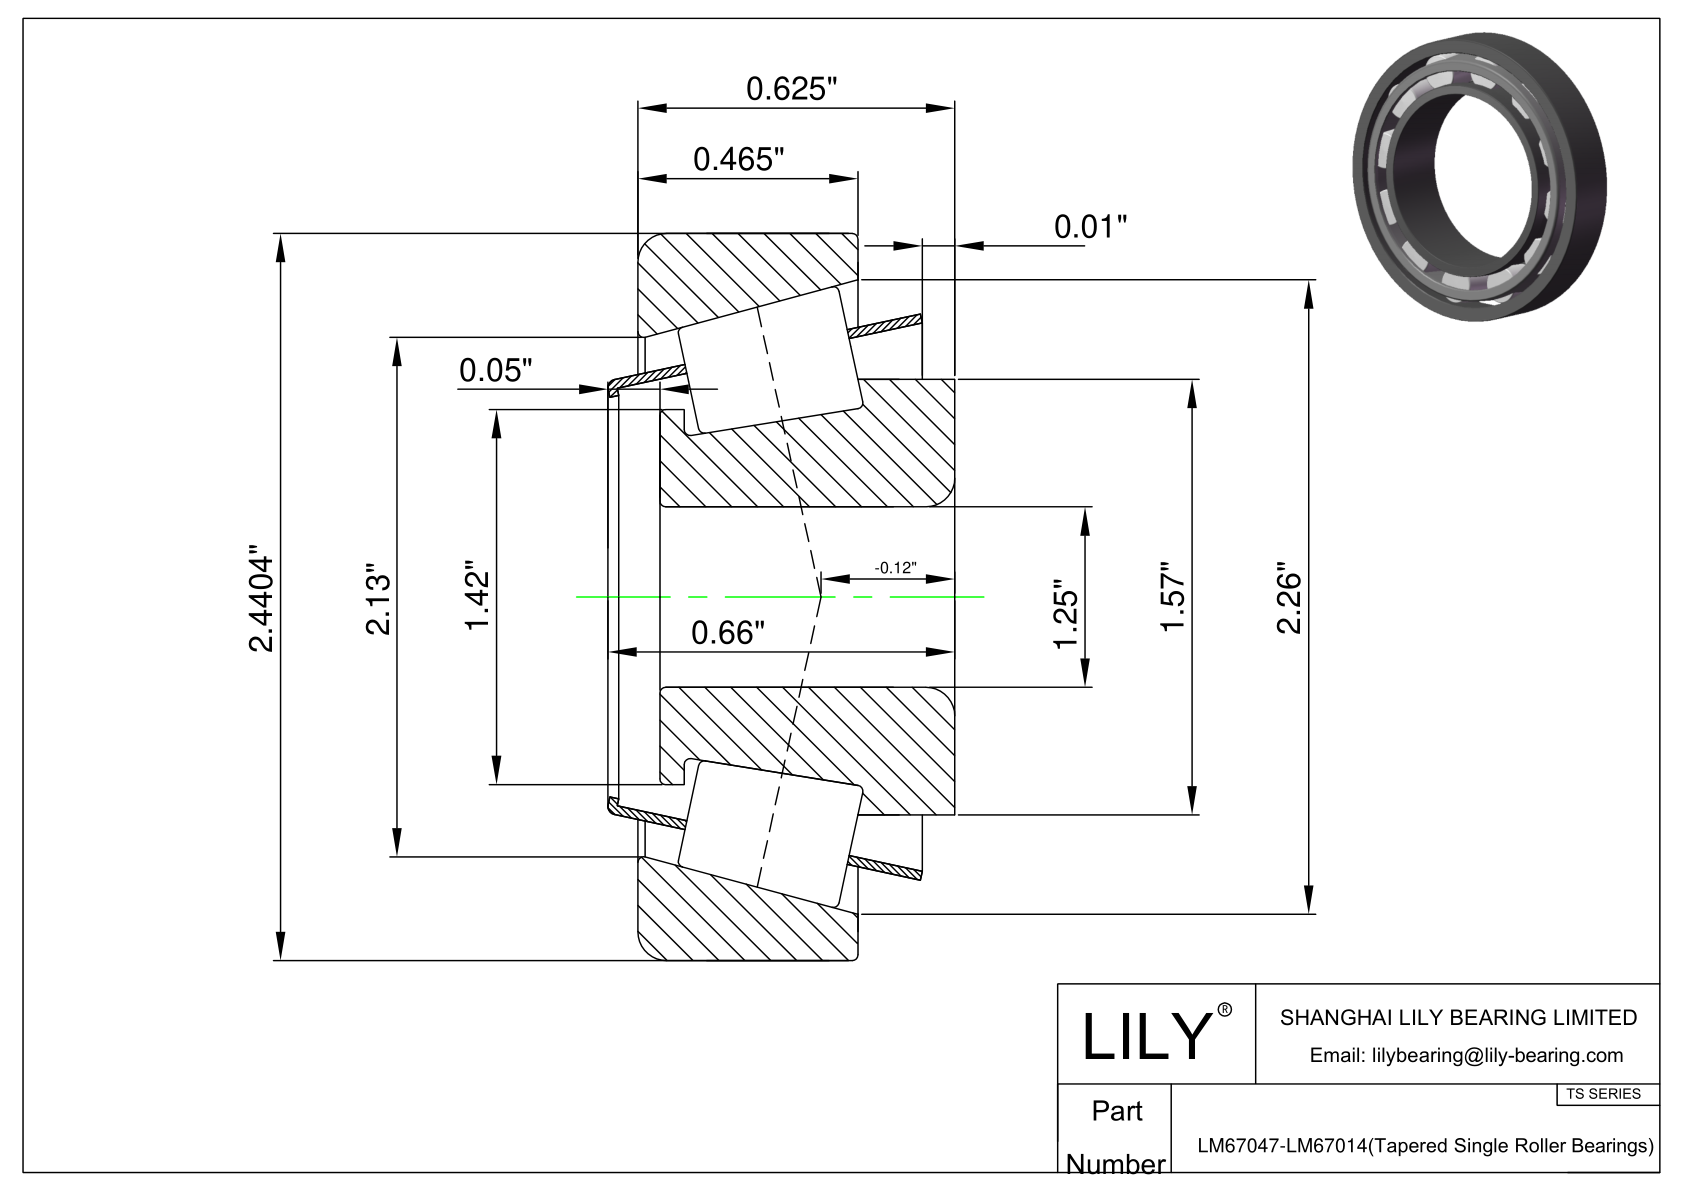 LM67047-LM67014 TS (Tapered Single Roller Bearings) (Imperial) cad drawing